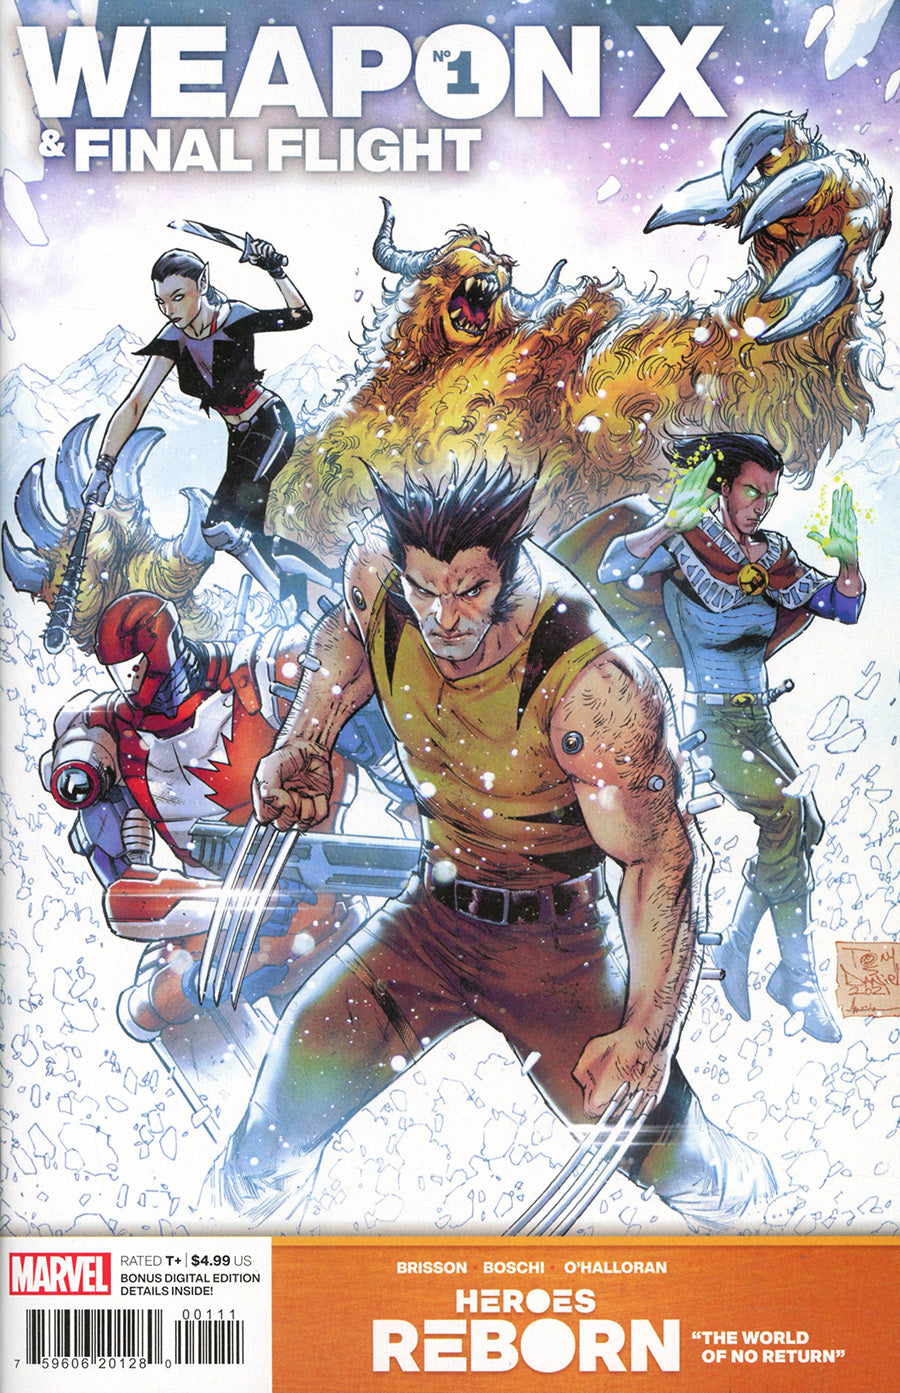 Marvel Comics - Heroes Reborn Weapon X And Final Flight #1 (One Shot) Cover